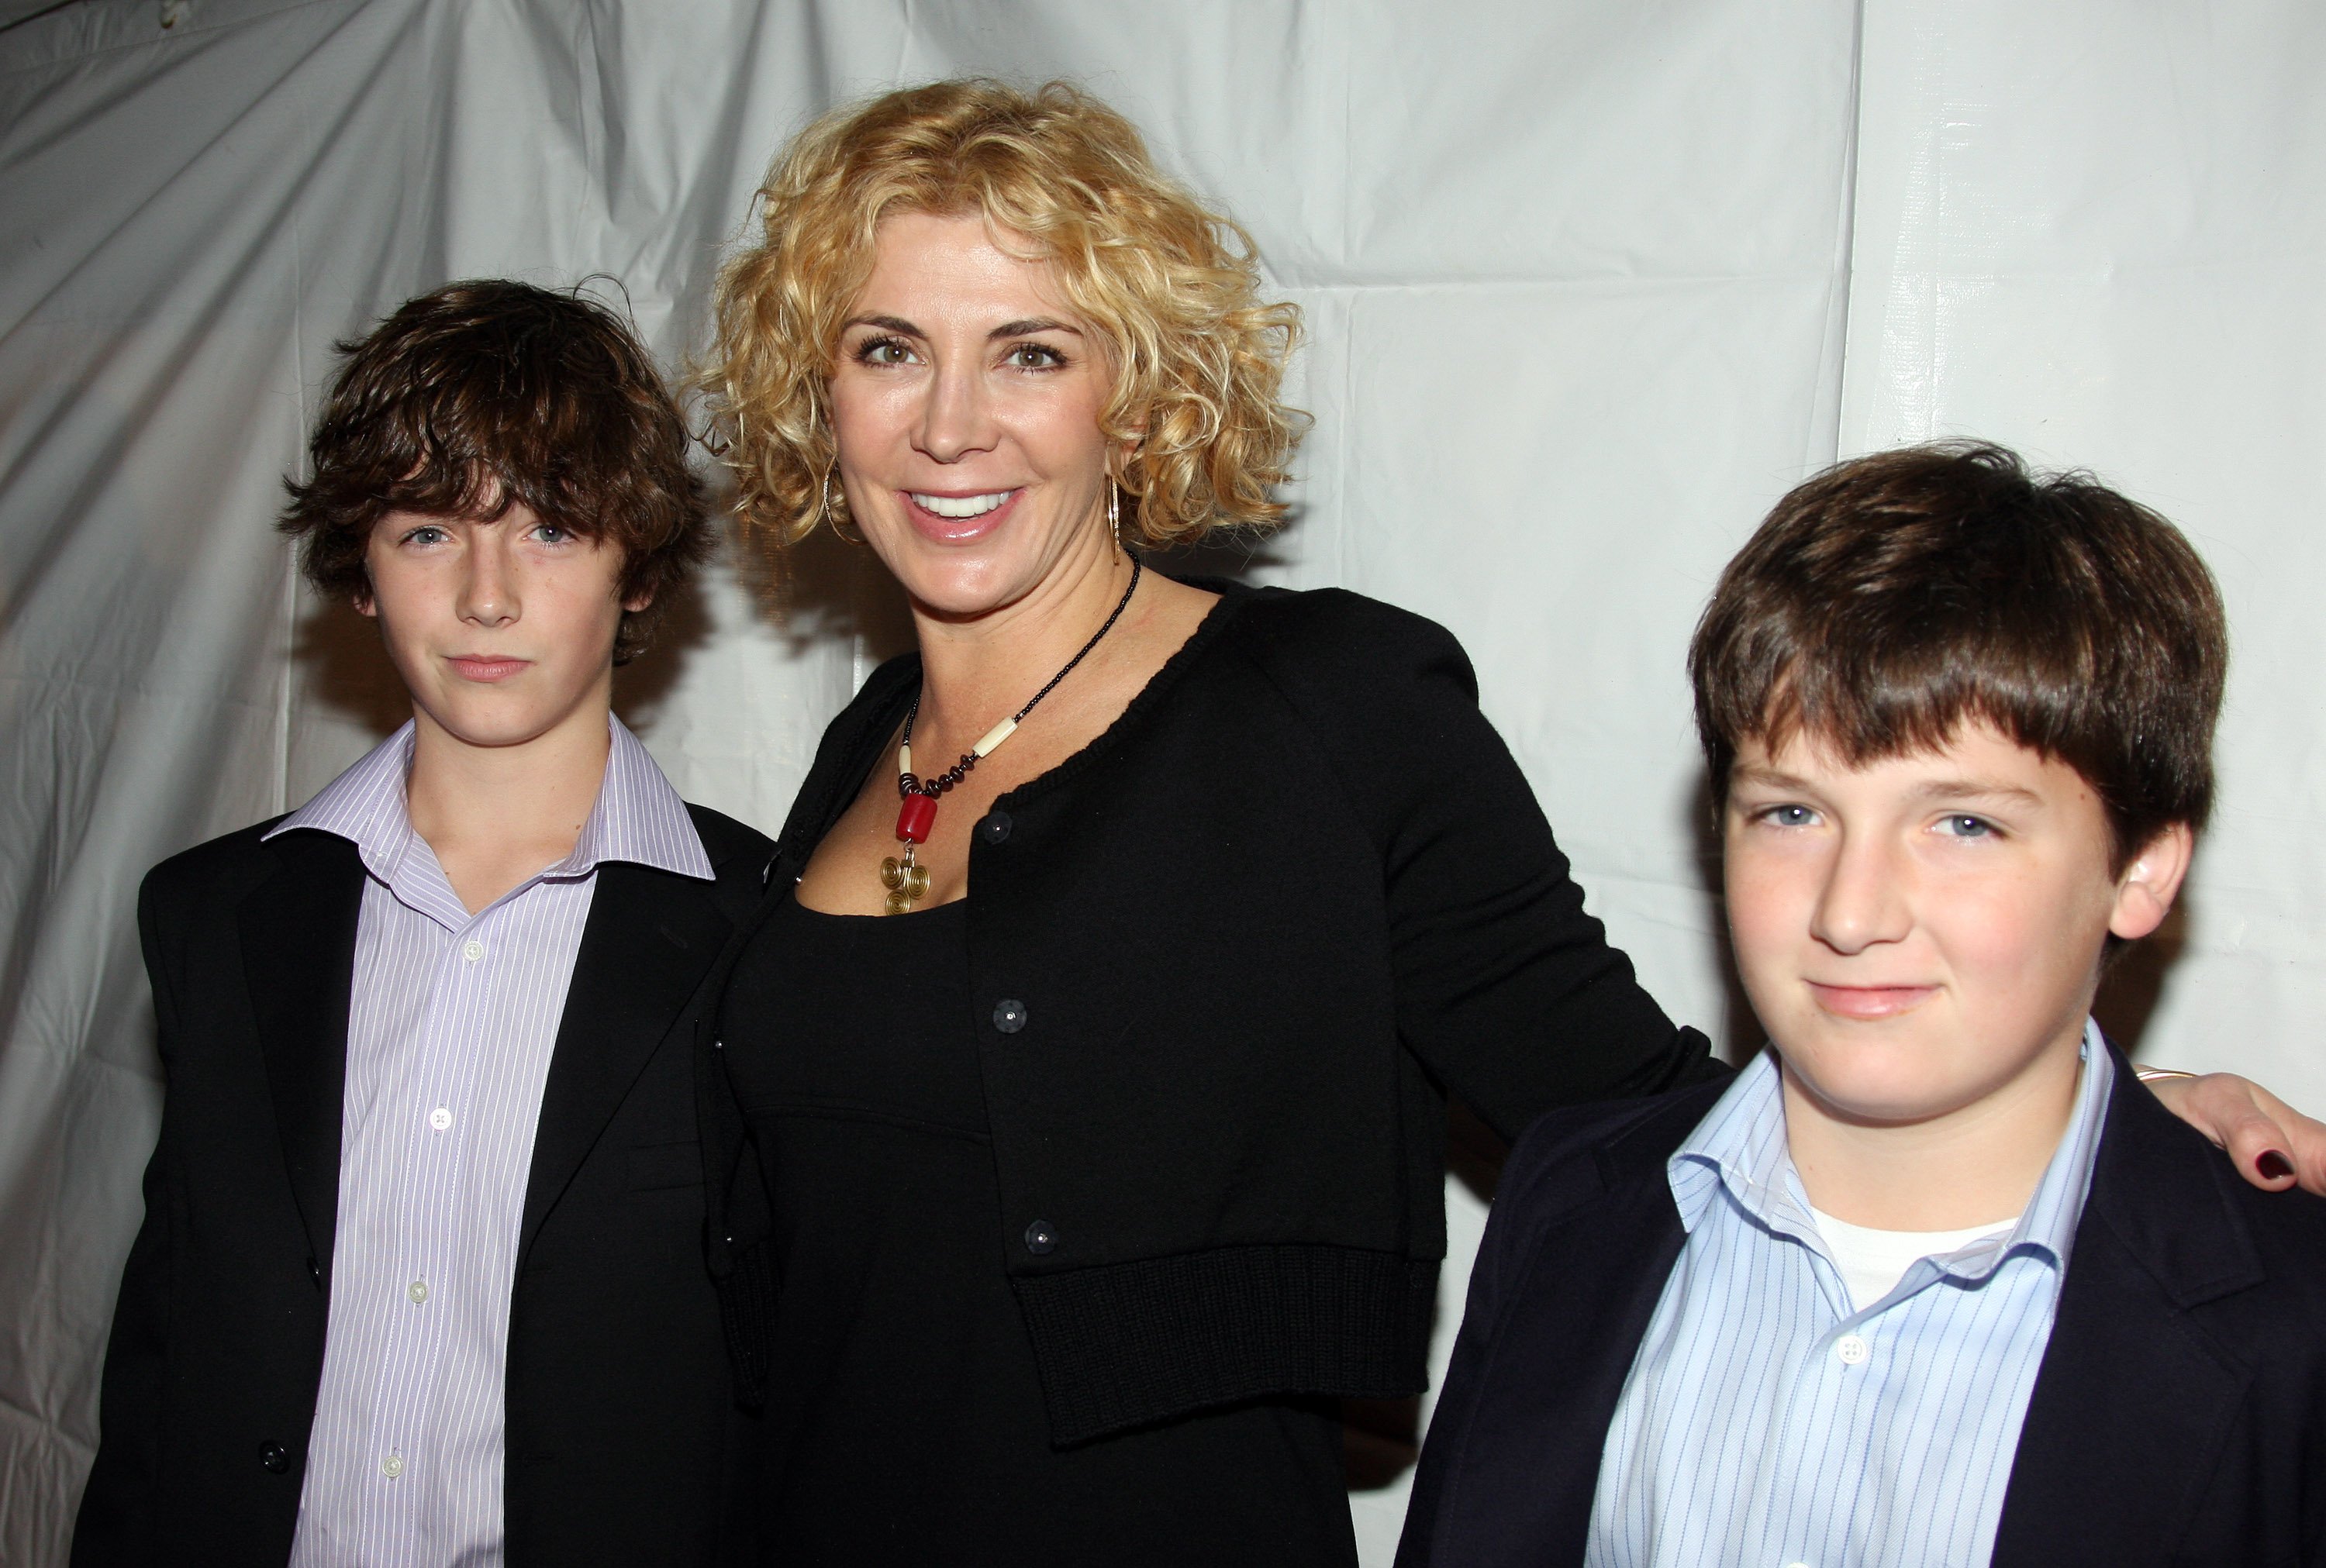 Natasha Richardson and her sons Micheal Neeson (L) and Daniel Neeson (R) during the "Billy Elliot The Musical" opening night on Broadway at the Imperial Theatre on November 13, 2008 in New York City. / Source: Getty Images